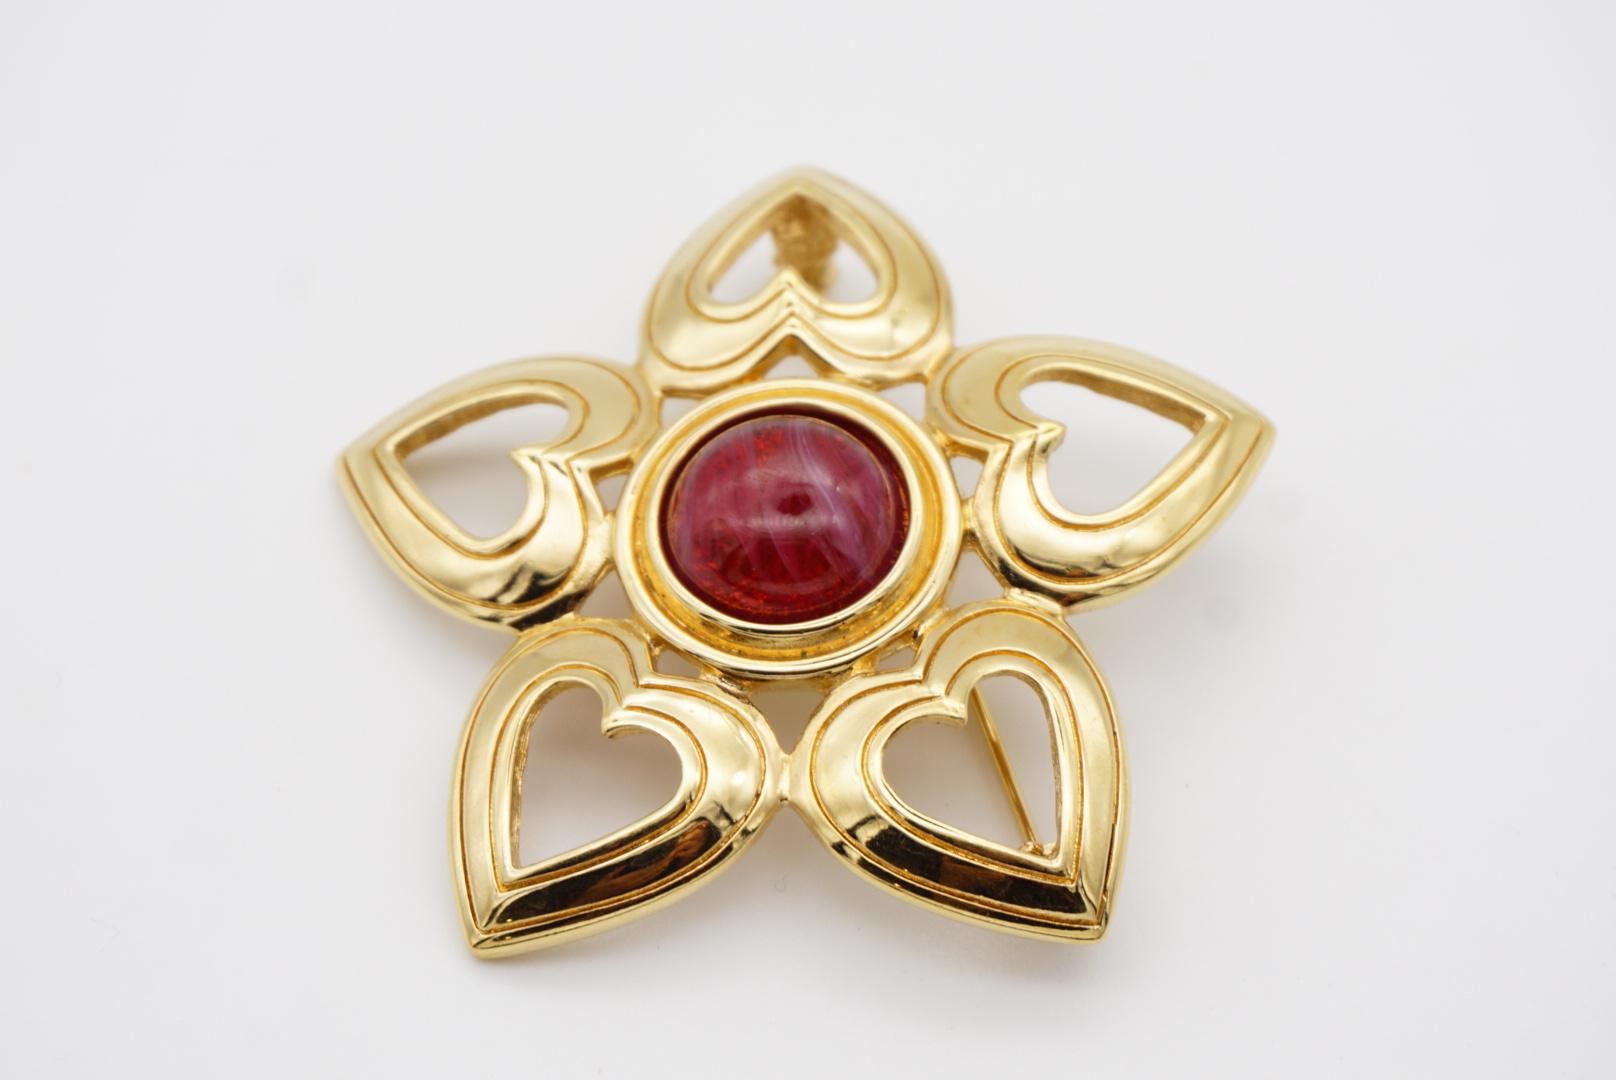 Christian Dior Vintage 1980s Large Openwork Pentagram Heart Ruby Crystal Brooch In Excellent Condition For Sale In Wokingham, England